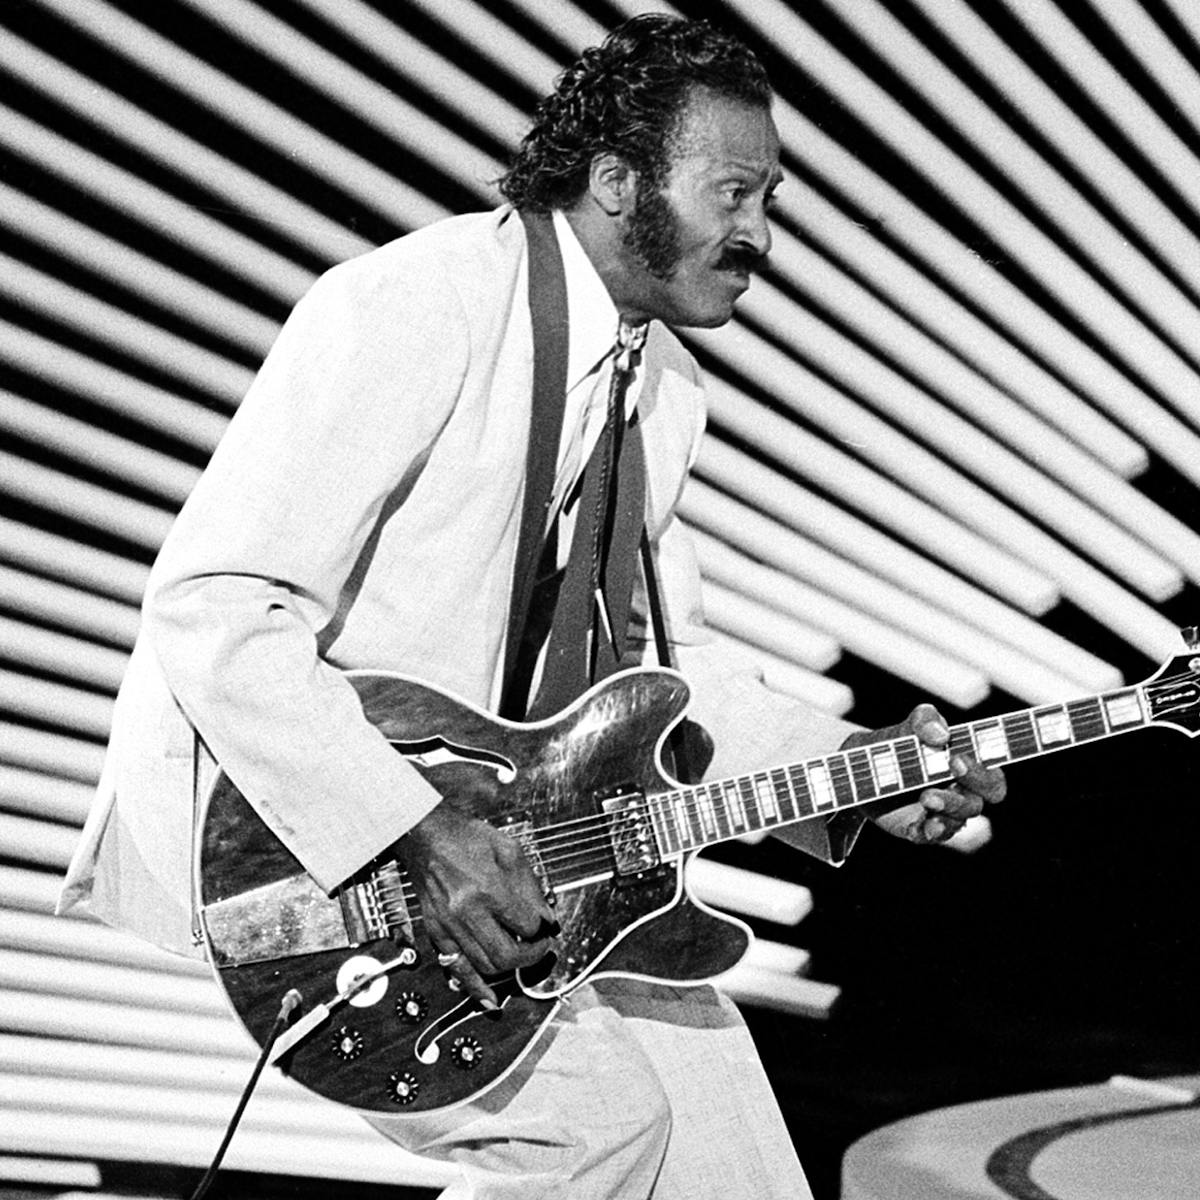 Was Chuck Berry the lone genius he's made out to be?